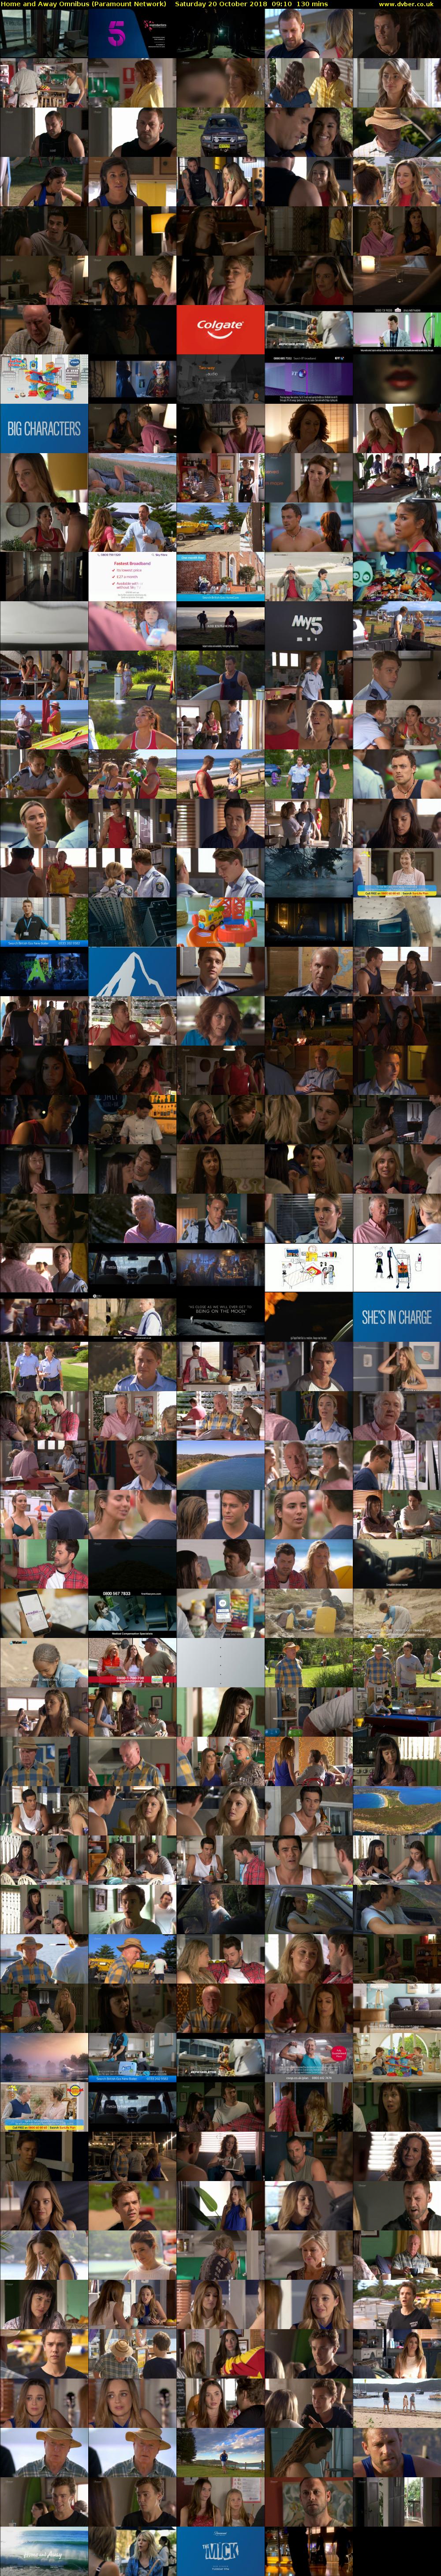 Home and Away Omnibus (Paramount Network) Saturday 20 October 2018 09:10 - 11:20